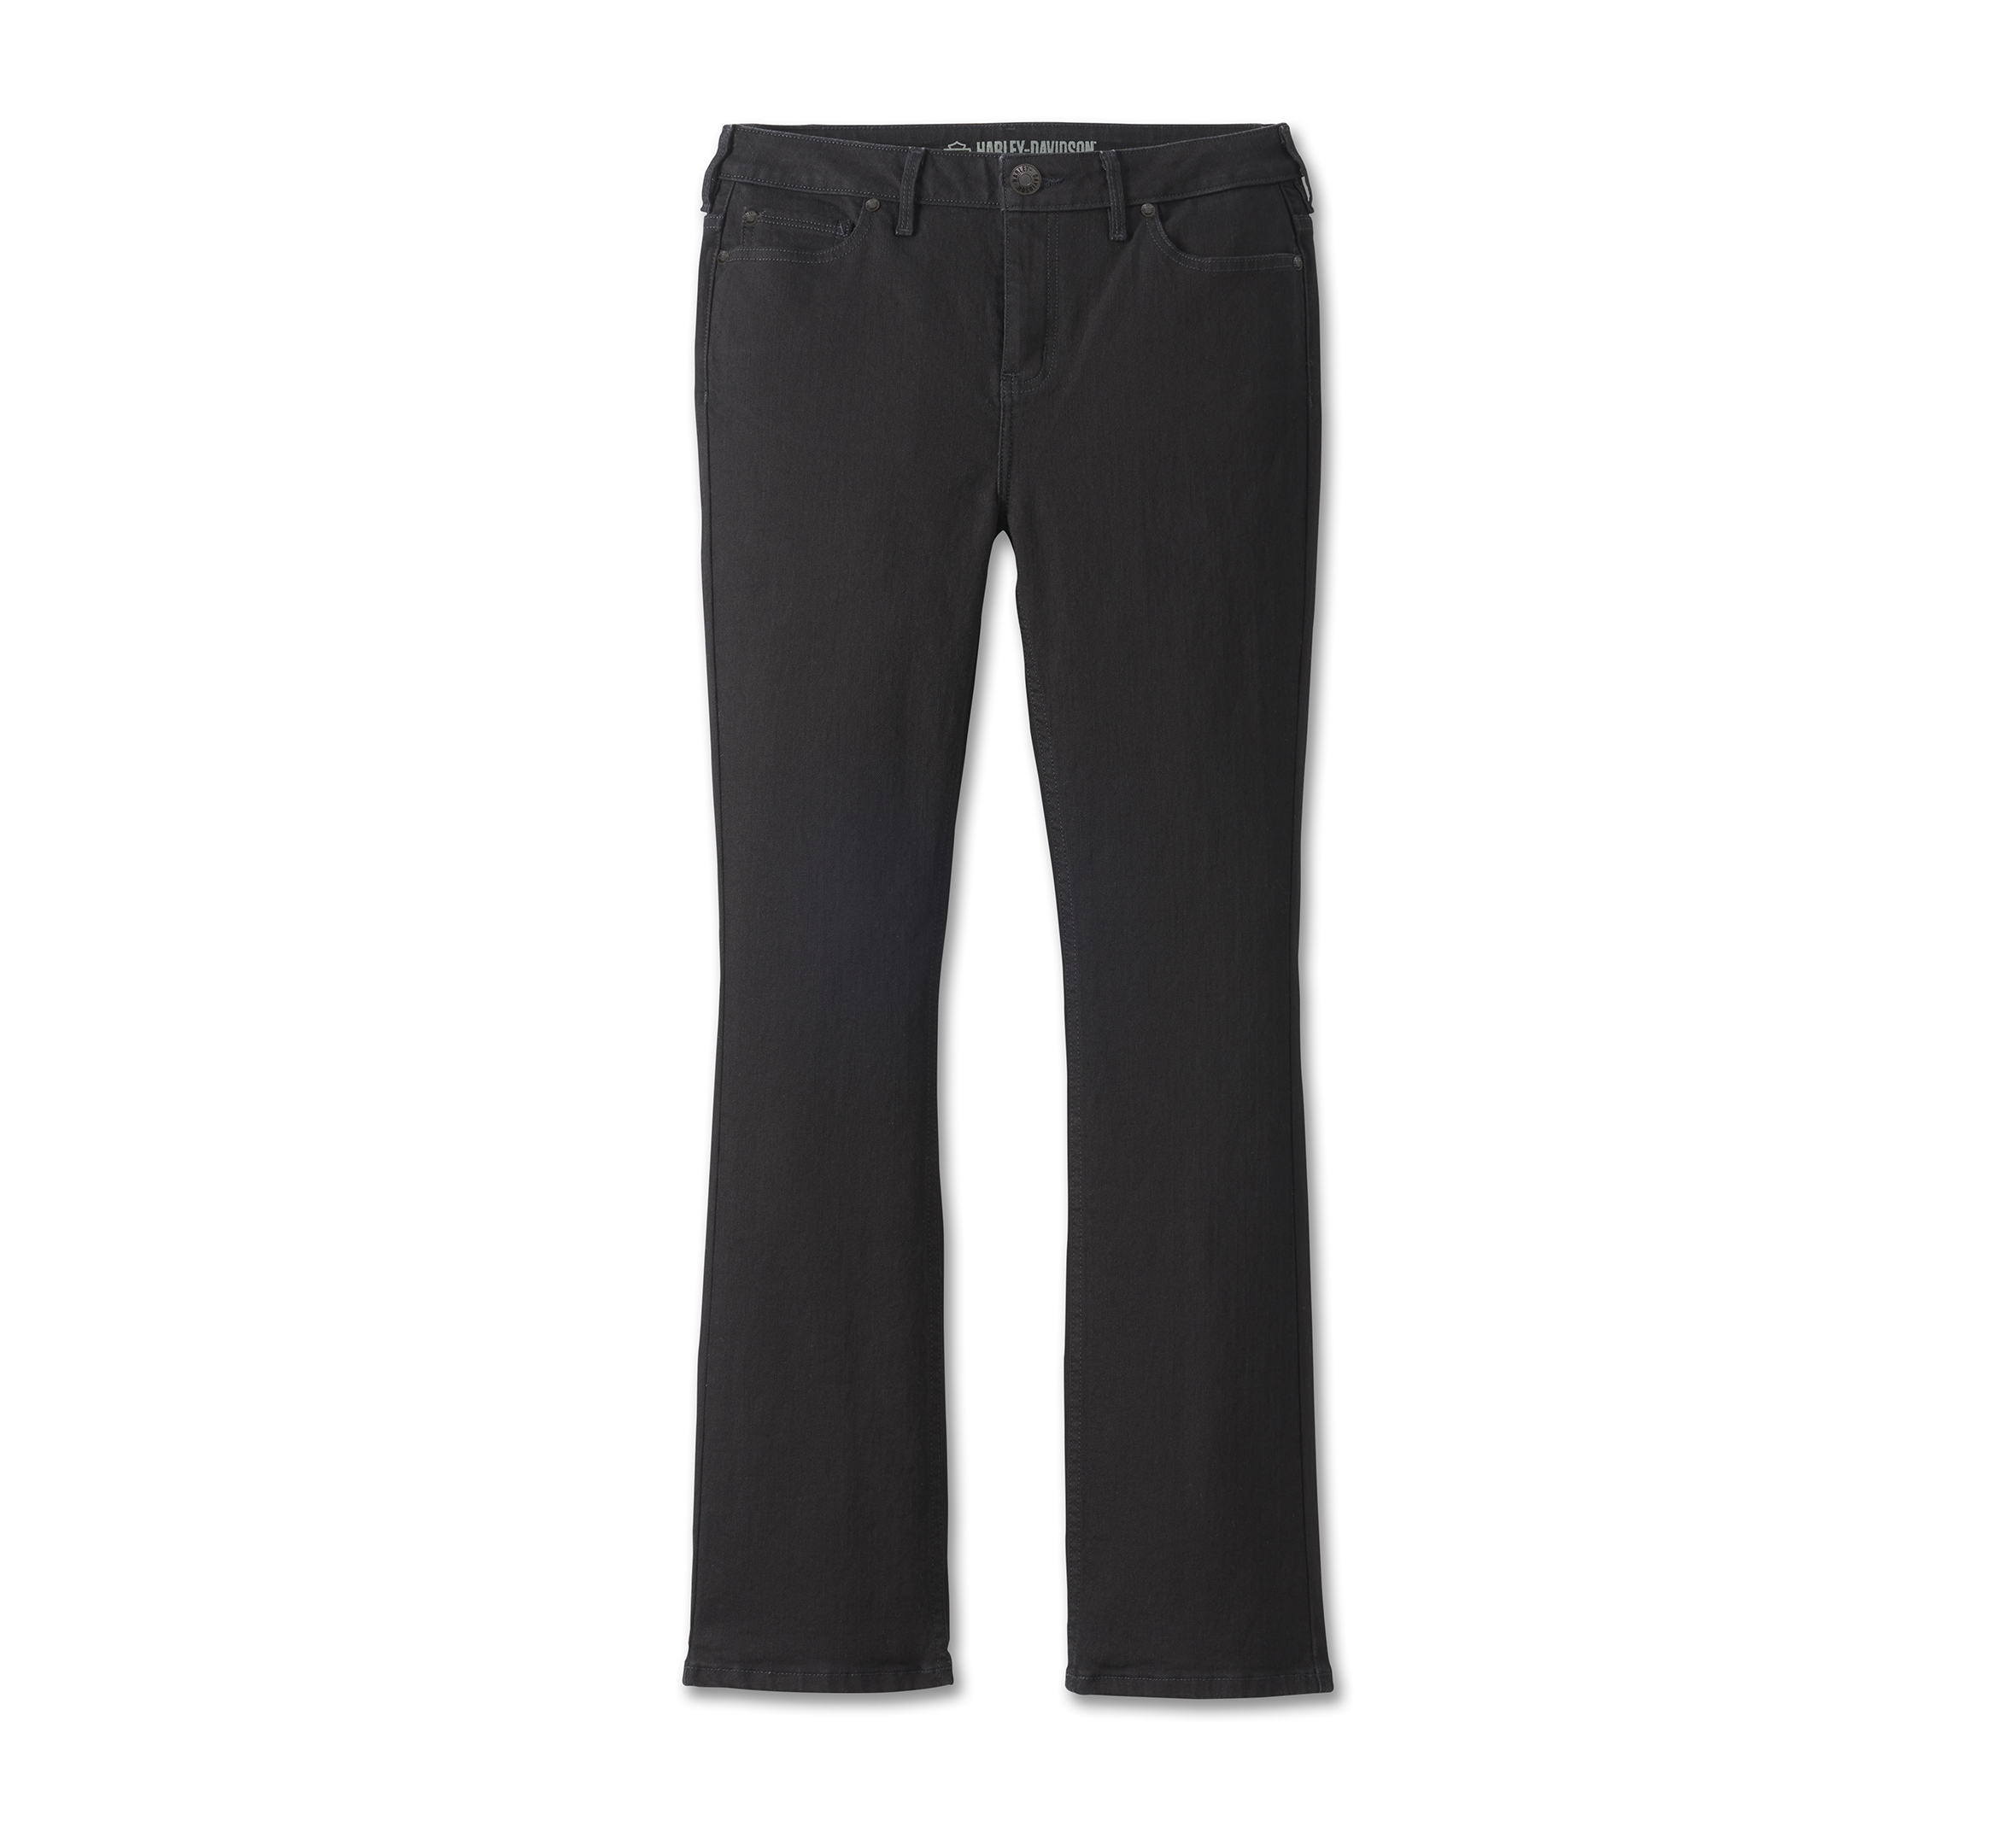 Jeans & Trousers | Womens Charcoal Colour Bootcut Denim Jeans | Freeup